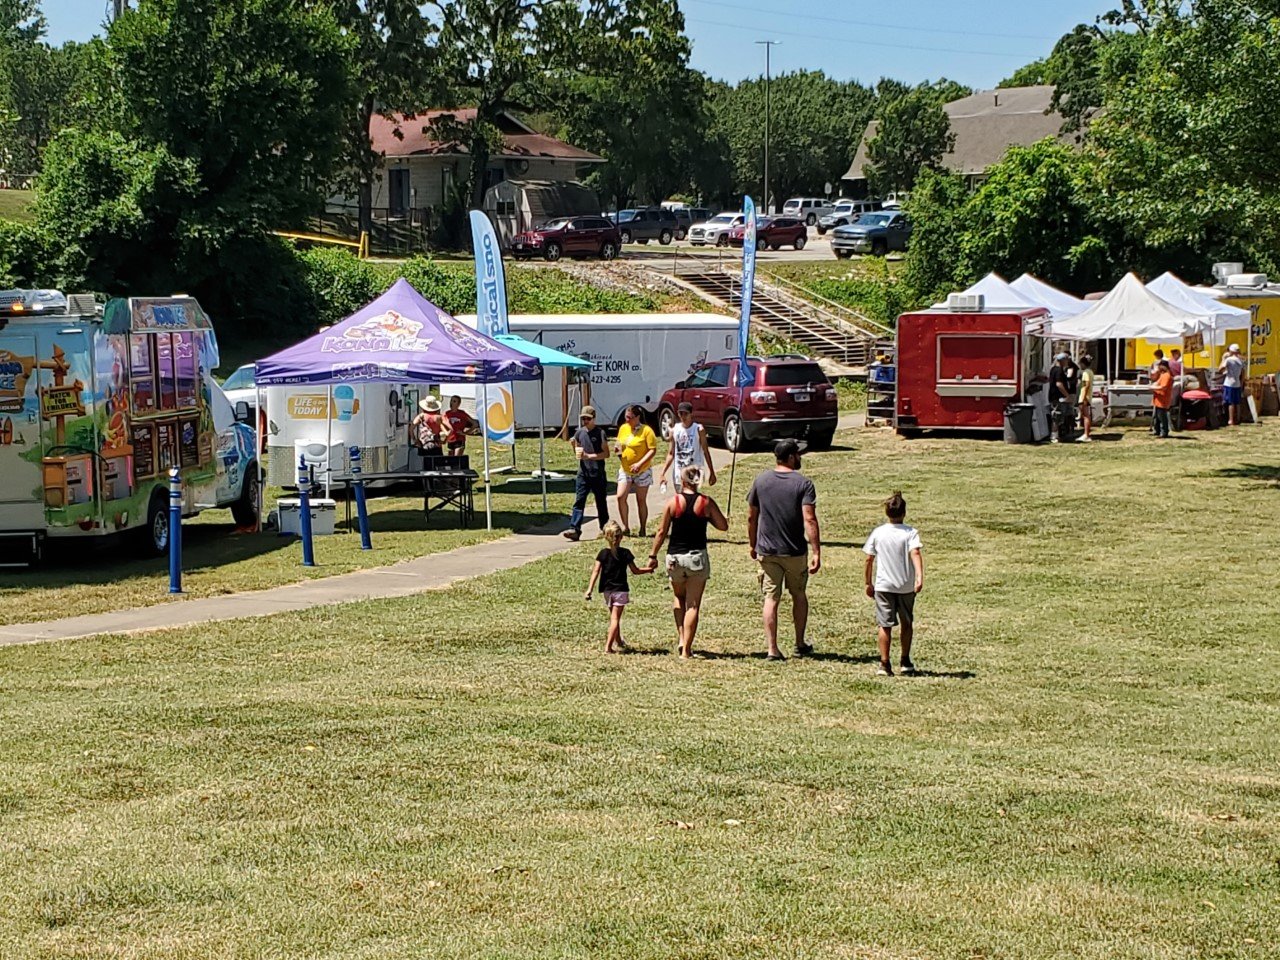 In addition to vendors selling a variety of craft products and souvenirs at Lincoln Park on Monday, the Fourth of July celebration also included several food trucks providing plenty to eat near the park’s J.J. Richards Band Shell.